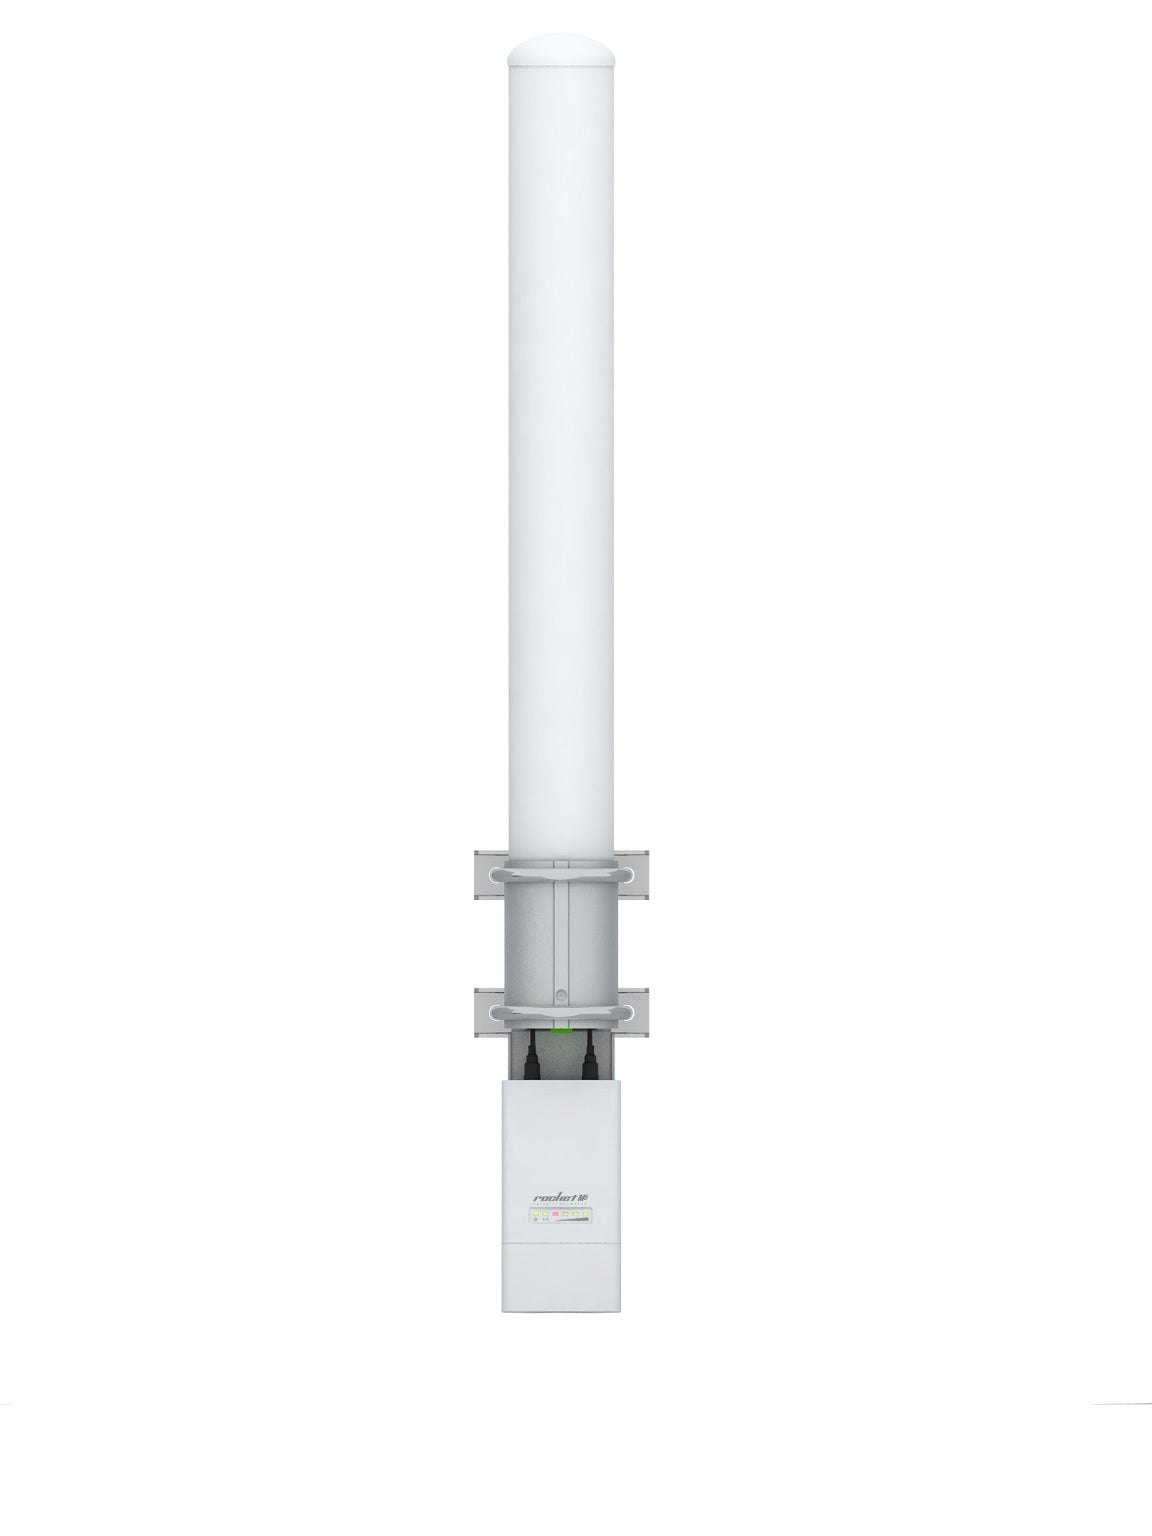 UBIQUITI 5GHz AirMax Dual Omni directional 13dBi Antenna - All mounting accessories and brackets included